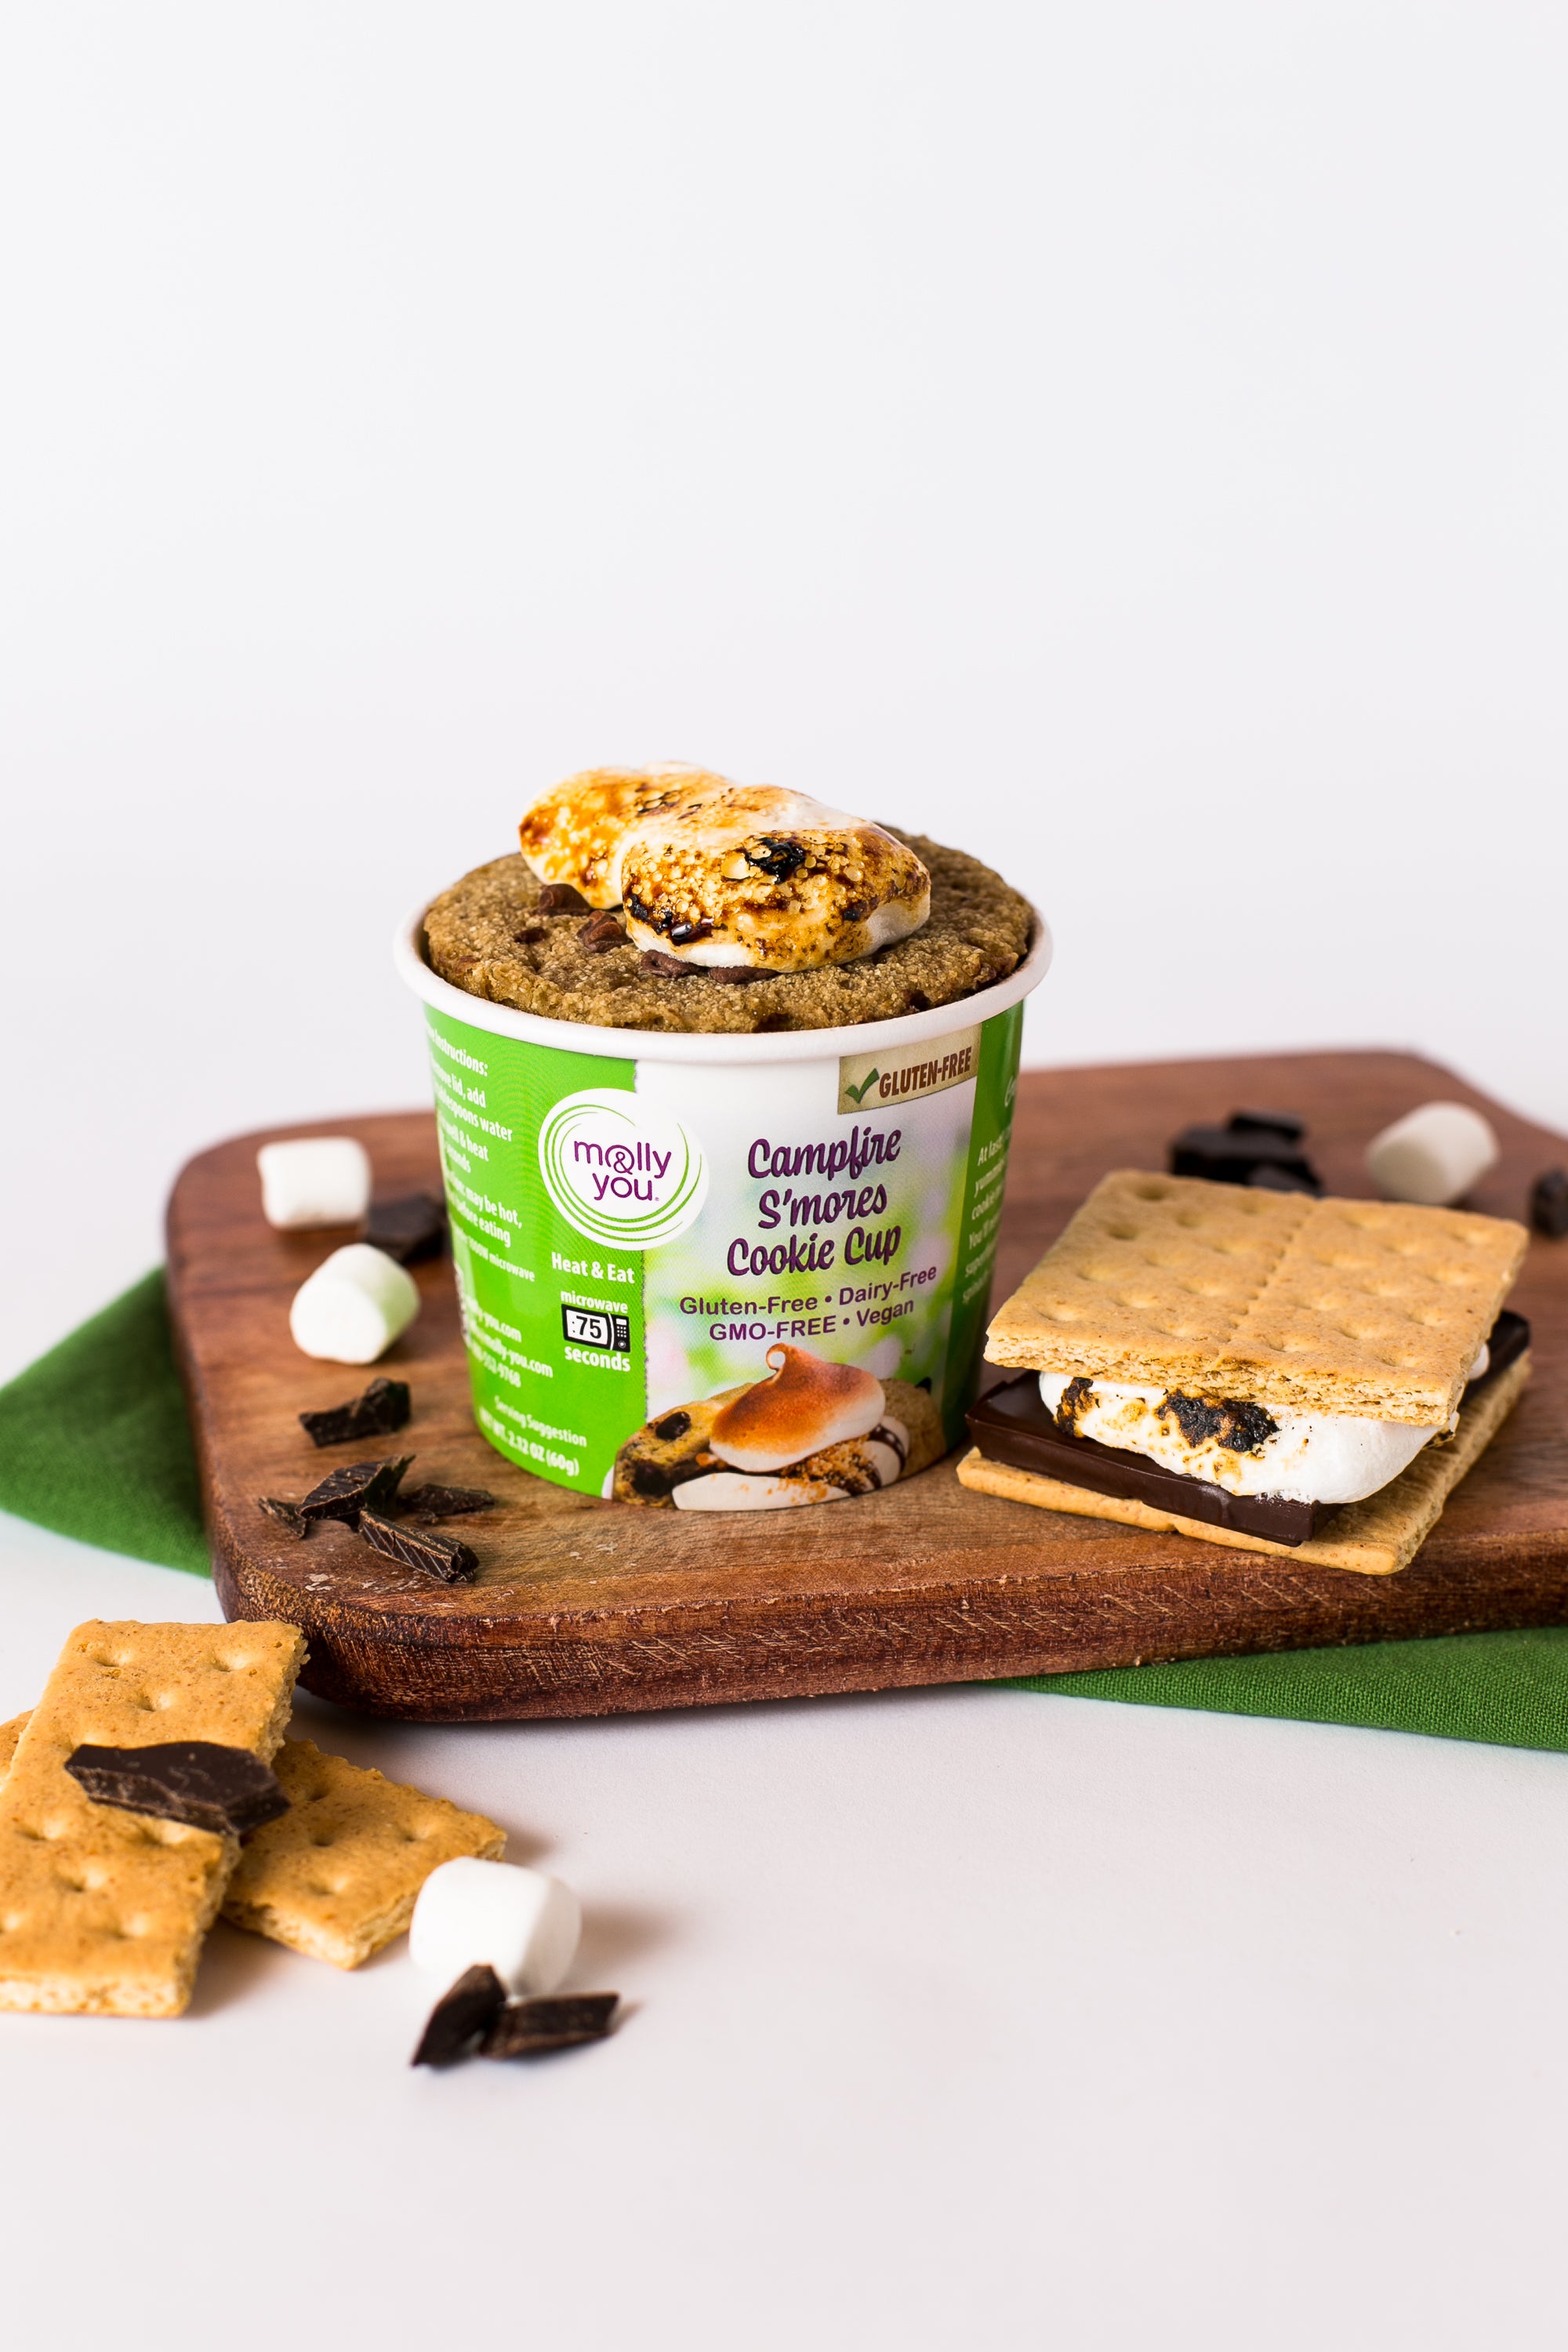 Gluten-Free Campfire S'mores Cookie Cup 3-Pack.